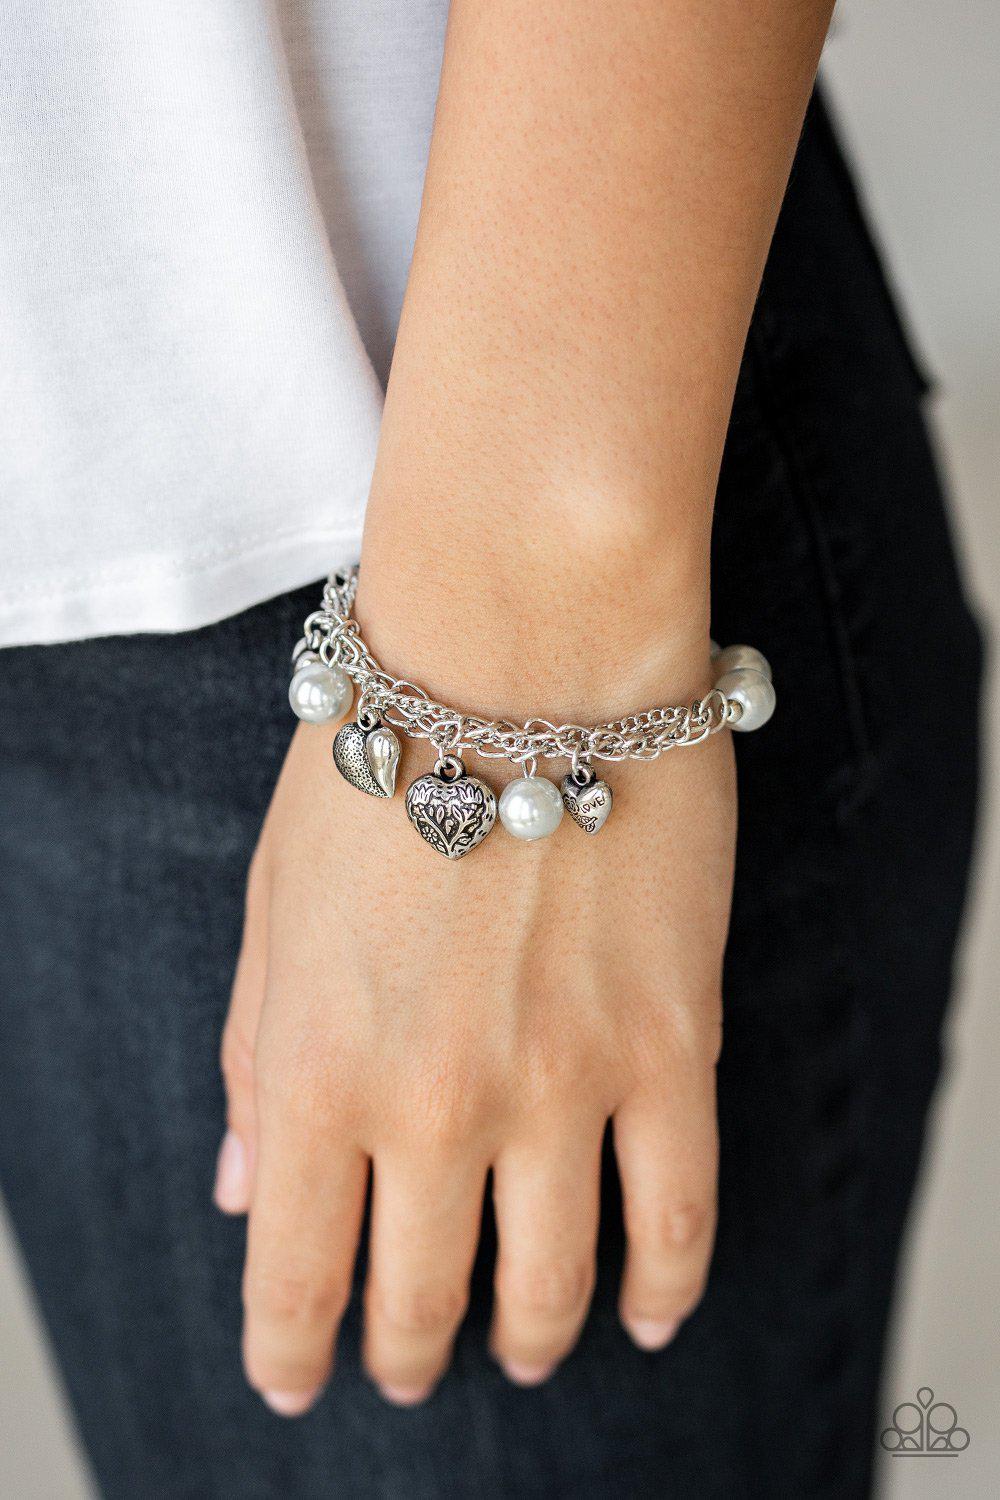 More Amour Silver Heart Stretch Bracelet - Paparazzi Accessories-CarasShop.com - $5 Jewelry by Cara Jewels